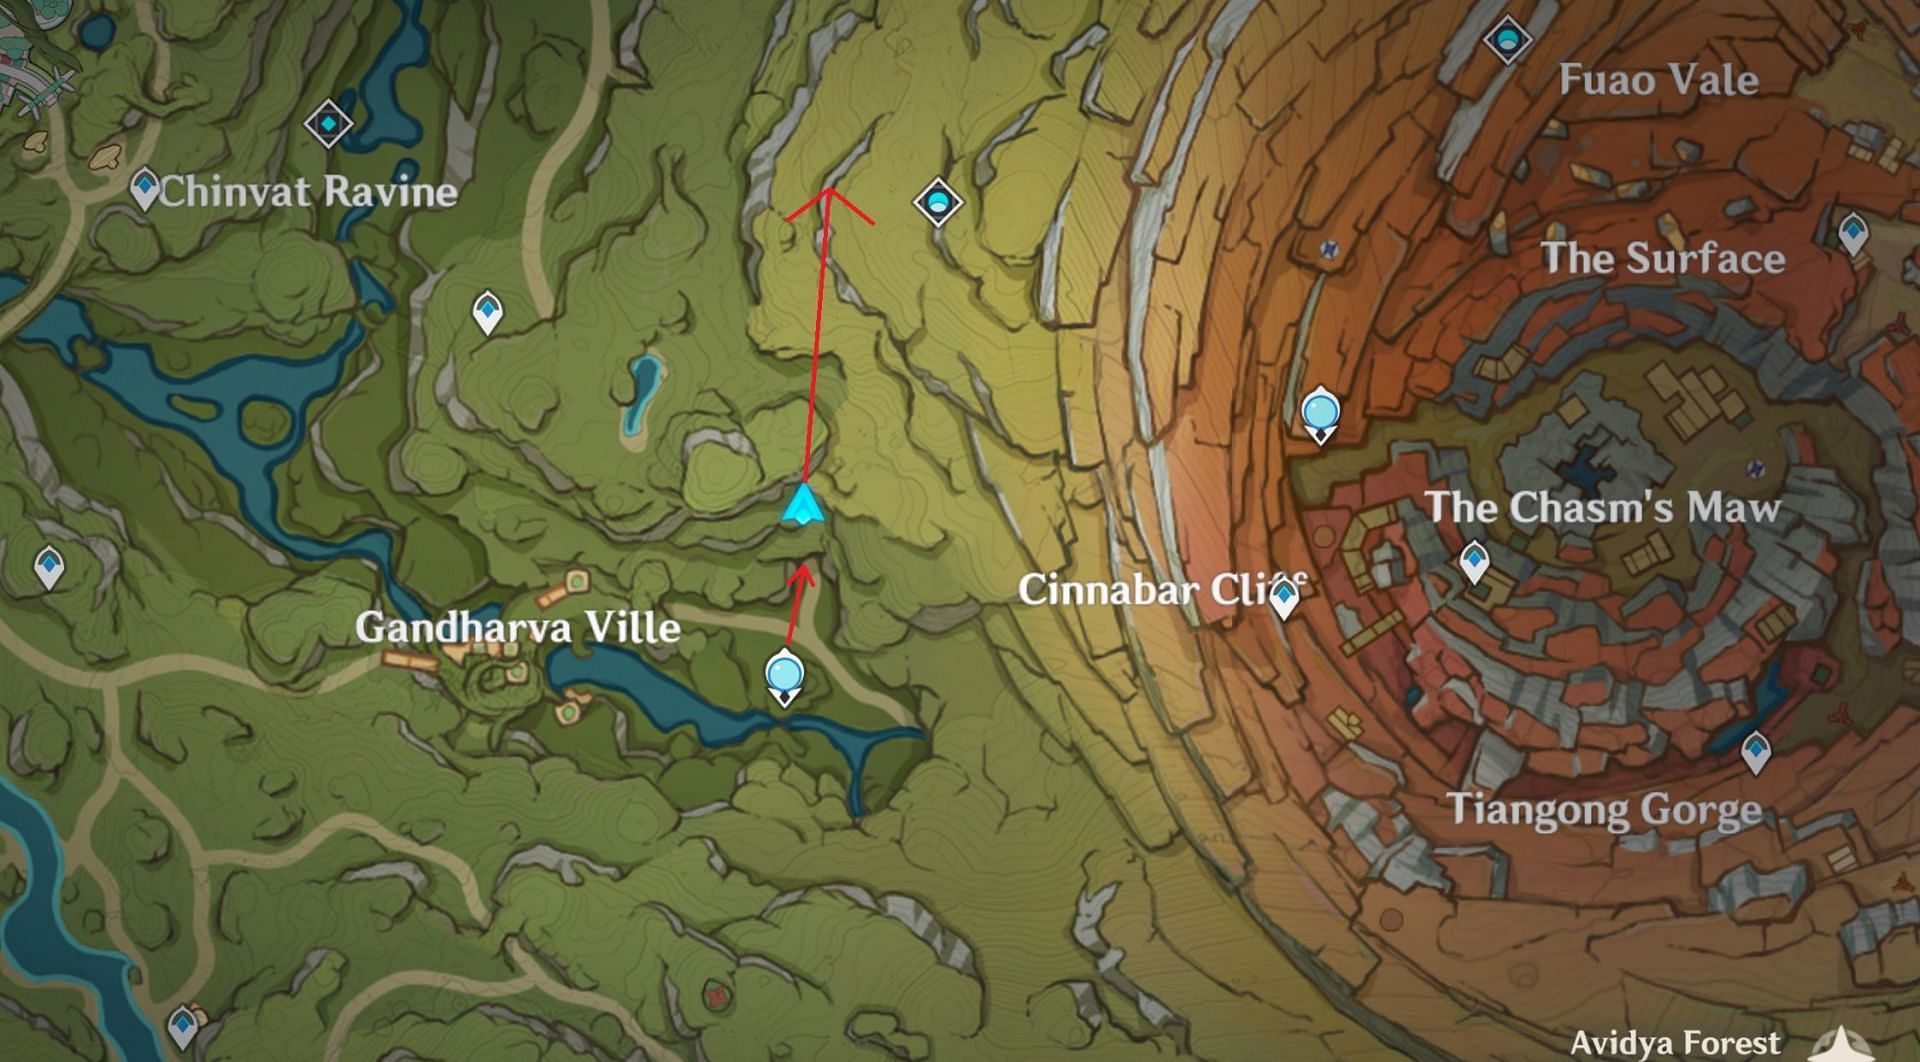 The cave in Gandharva Ville as seen on the map (Image via HoYoverse)